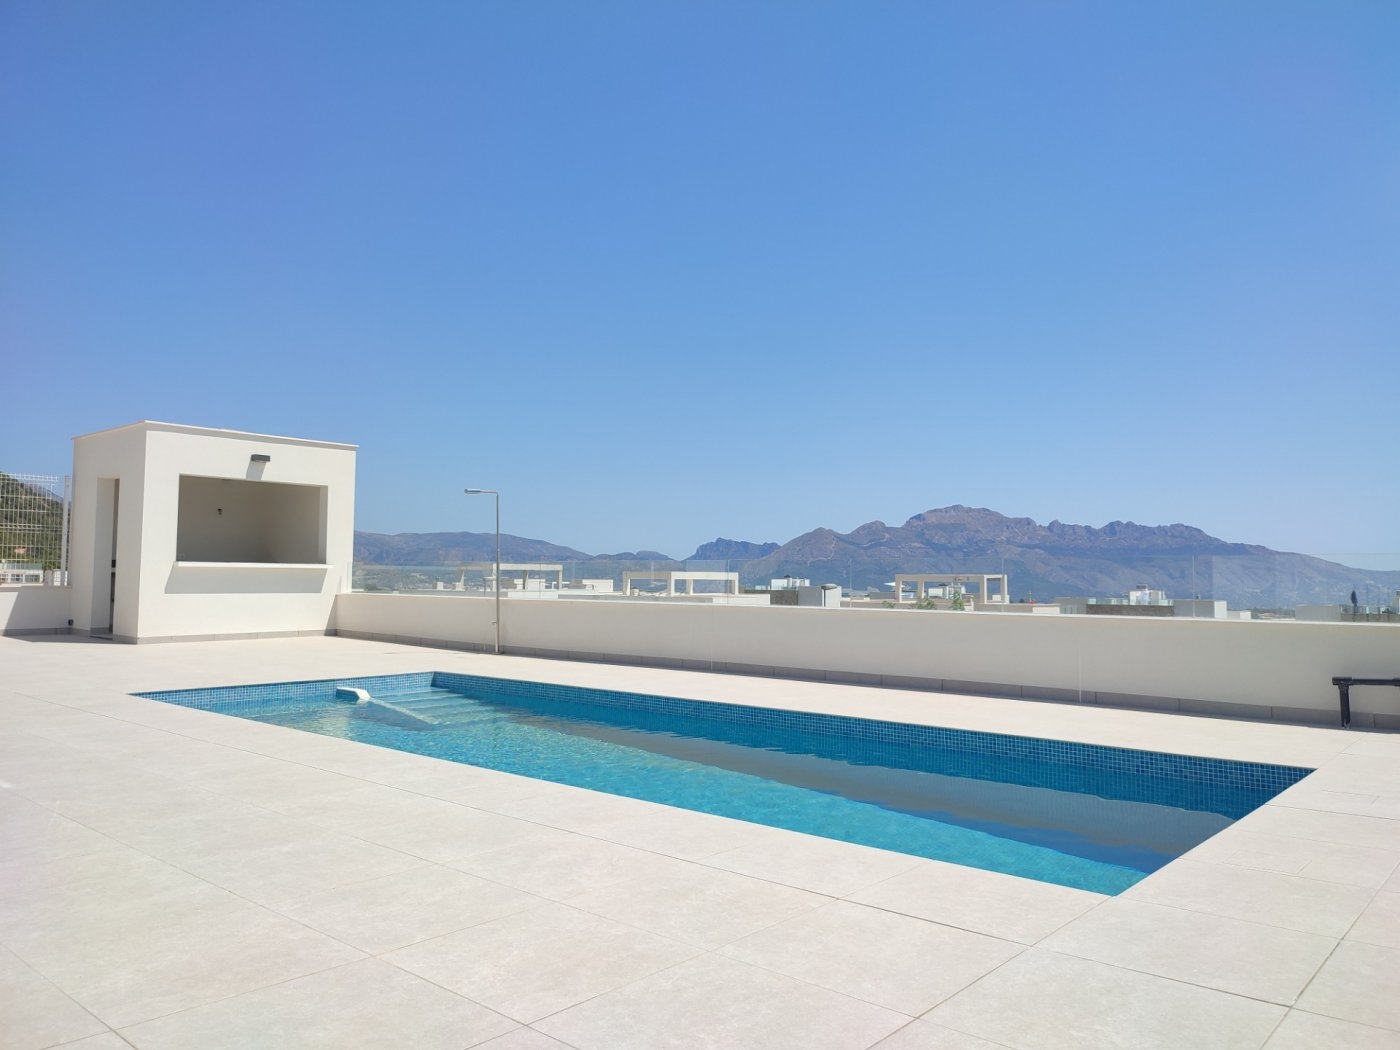 VERY NICE NEW VILLA FOR SALE POLOP COSTA BLANCA